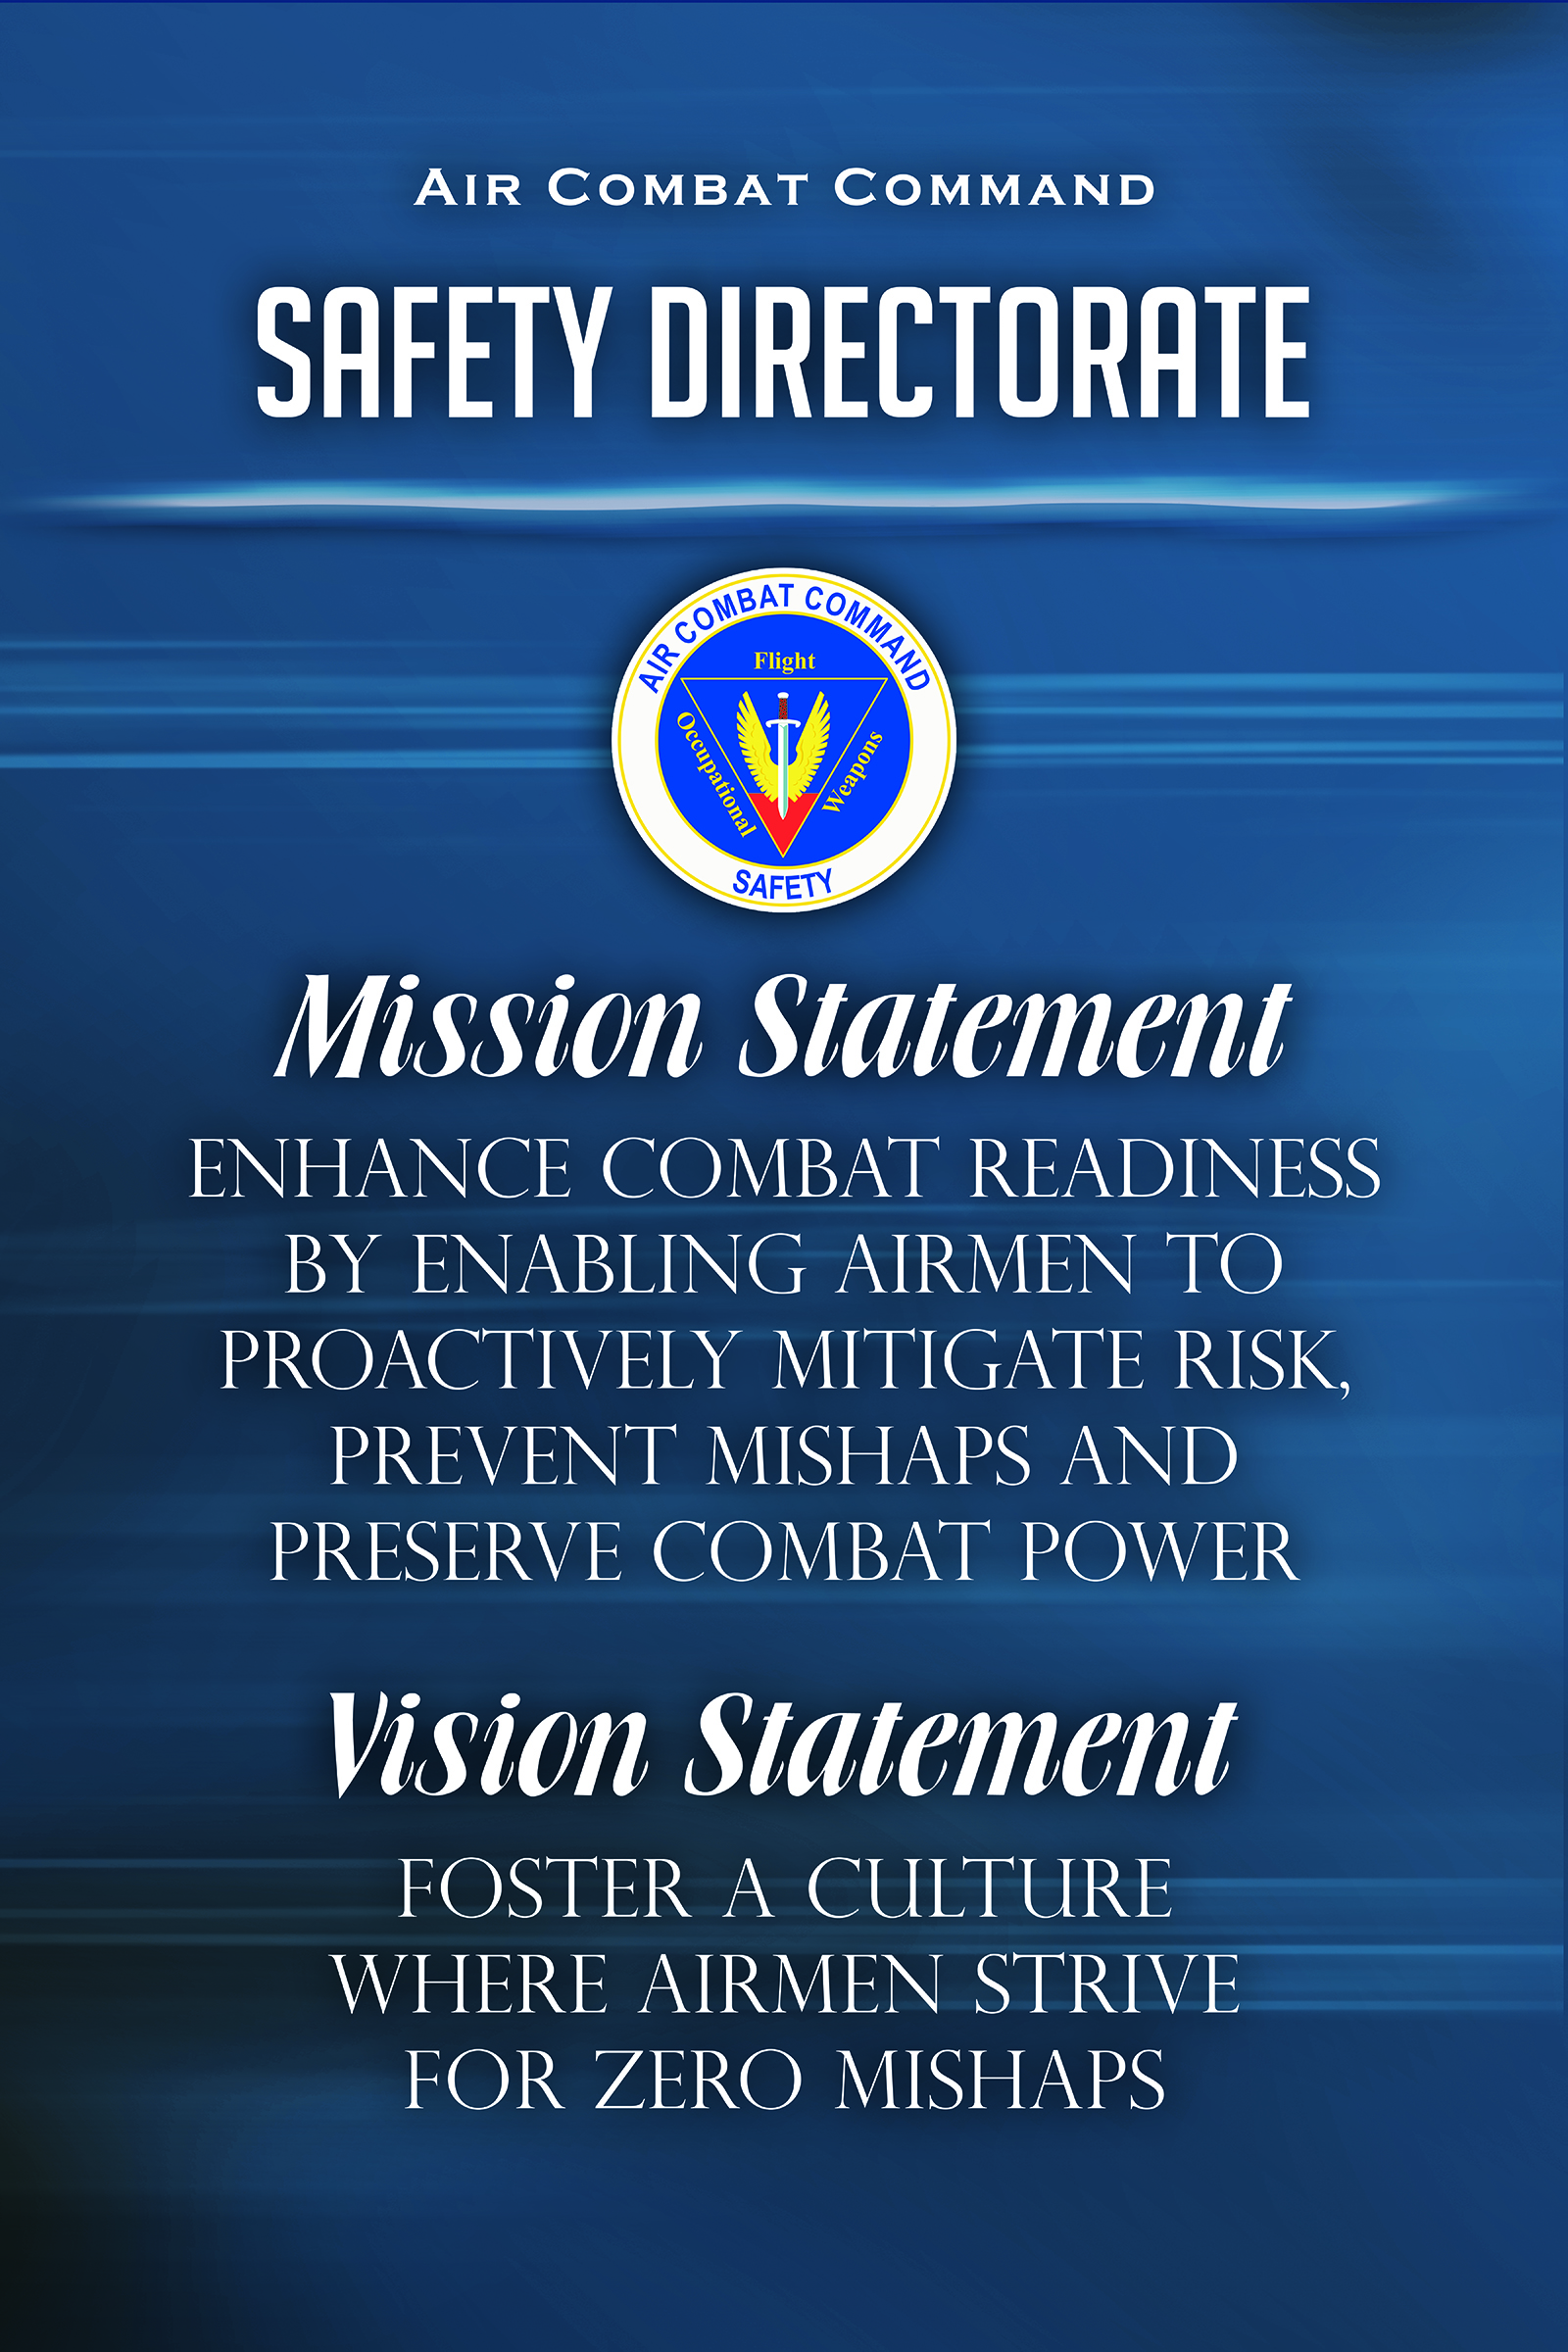 ACC Safety Directorate Mission and Vision